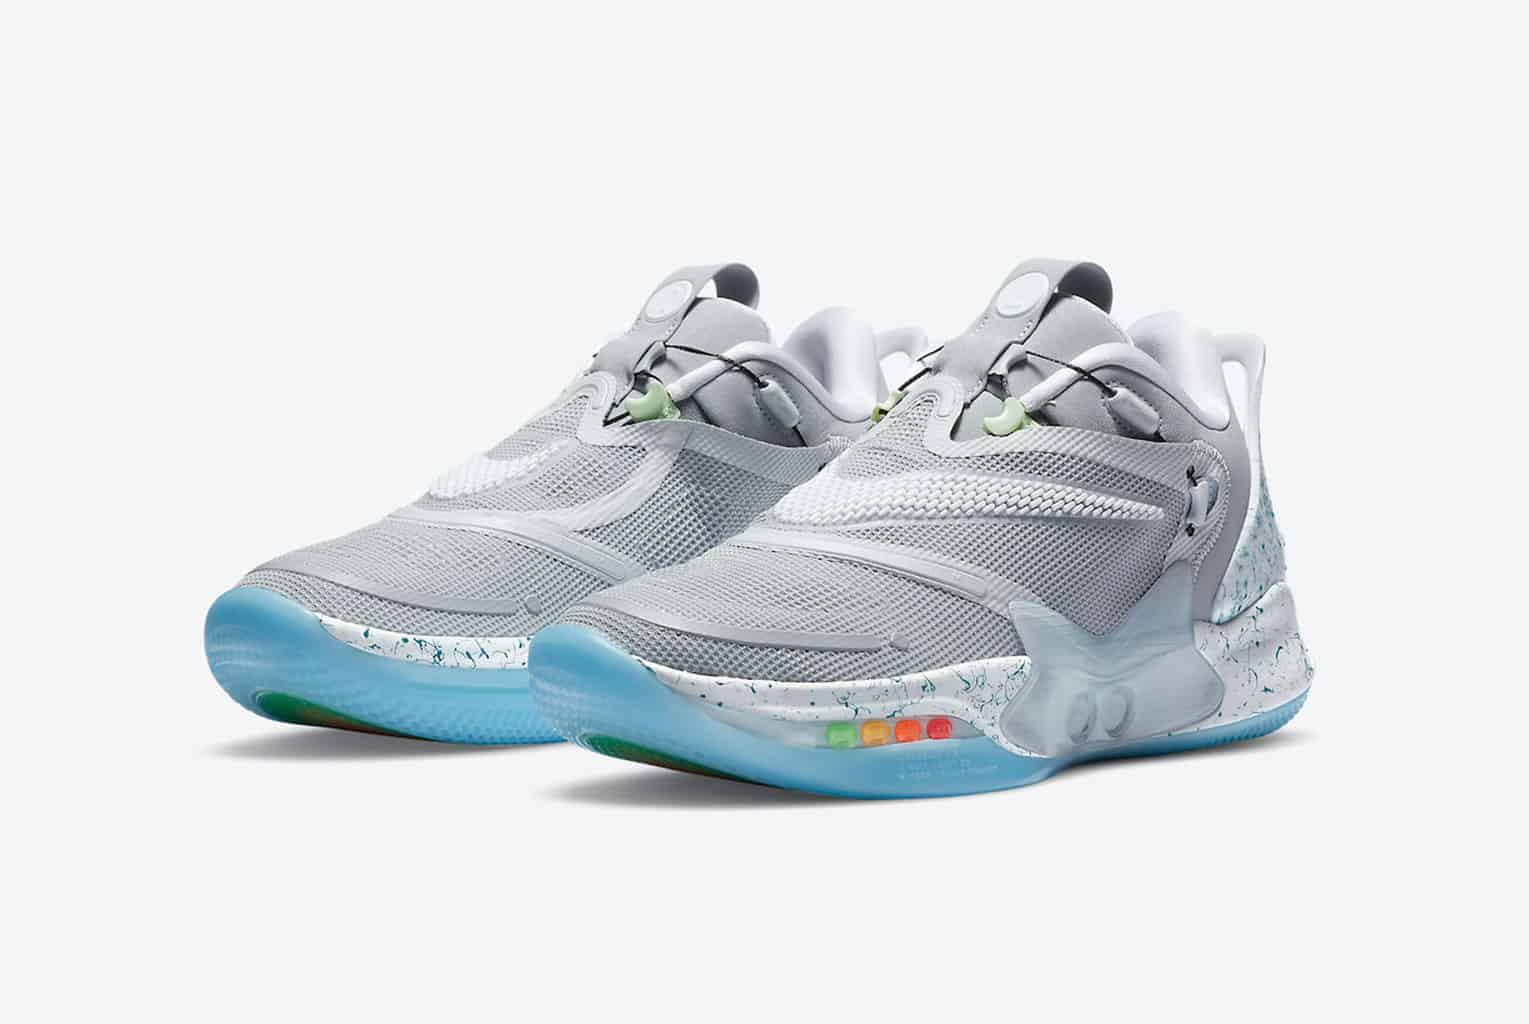 The New Nike Adapt BB 2.0 Will Take You Back To The Future